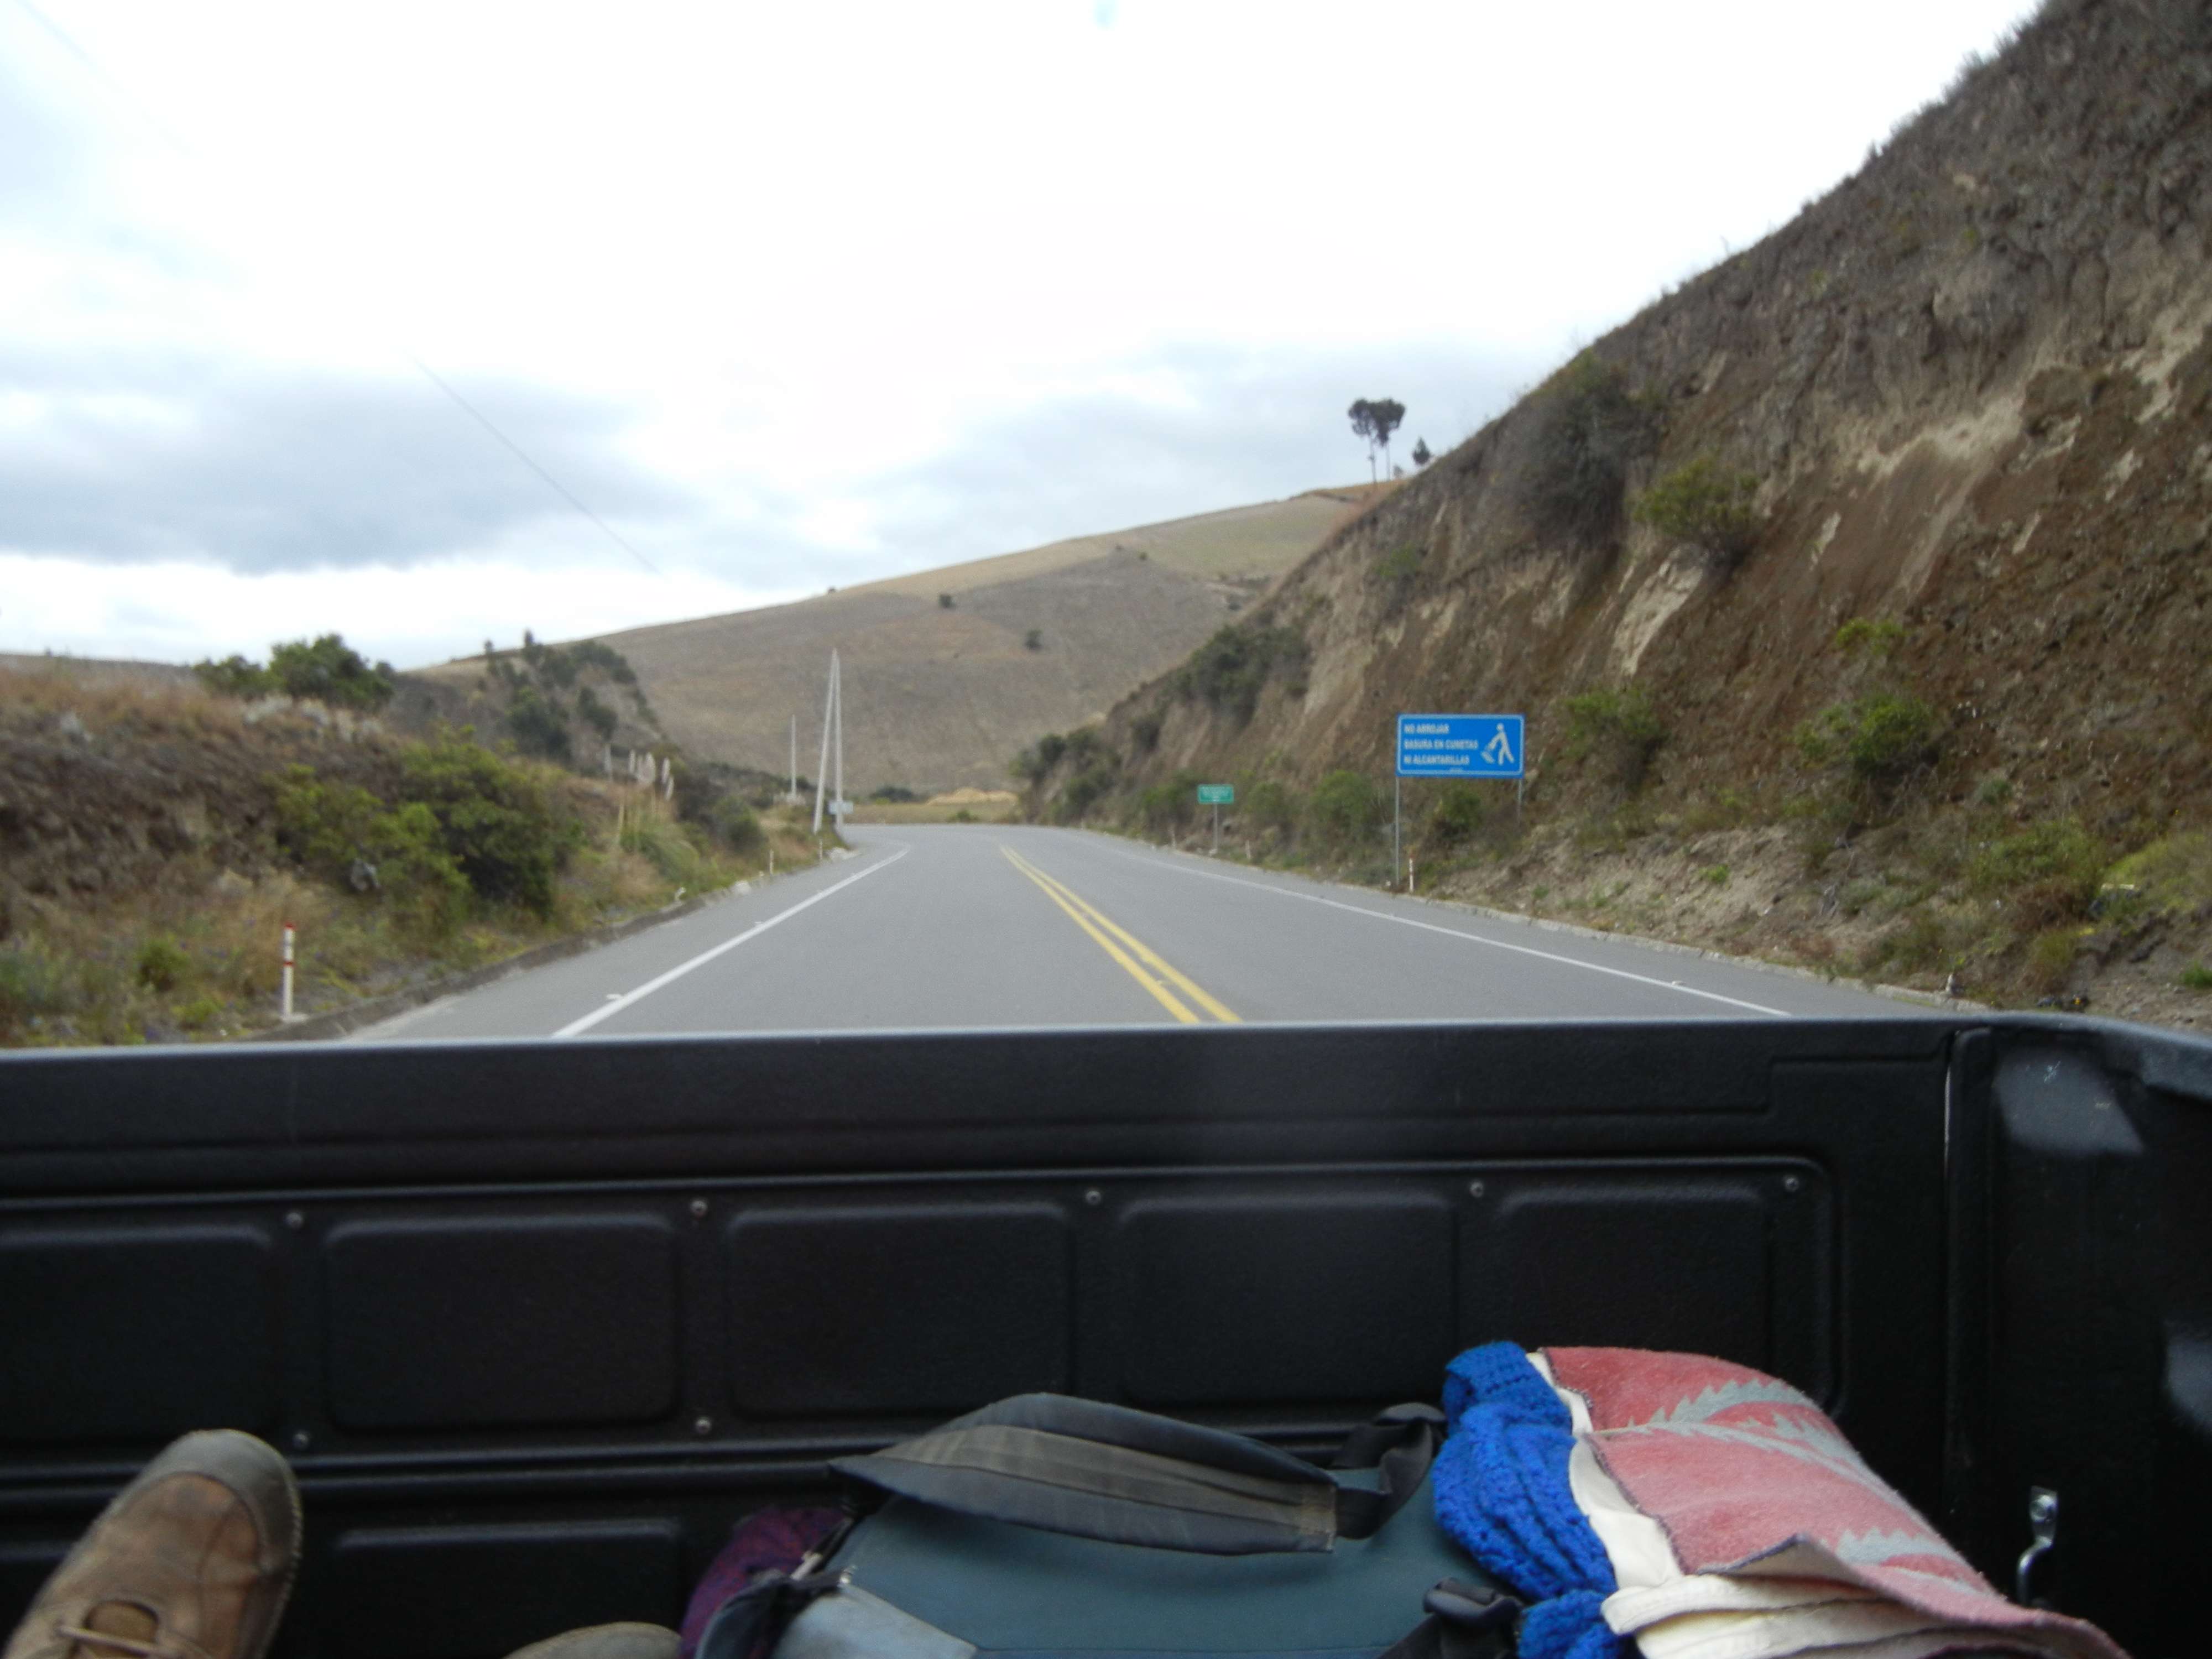 View from the back of the pickup truck